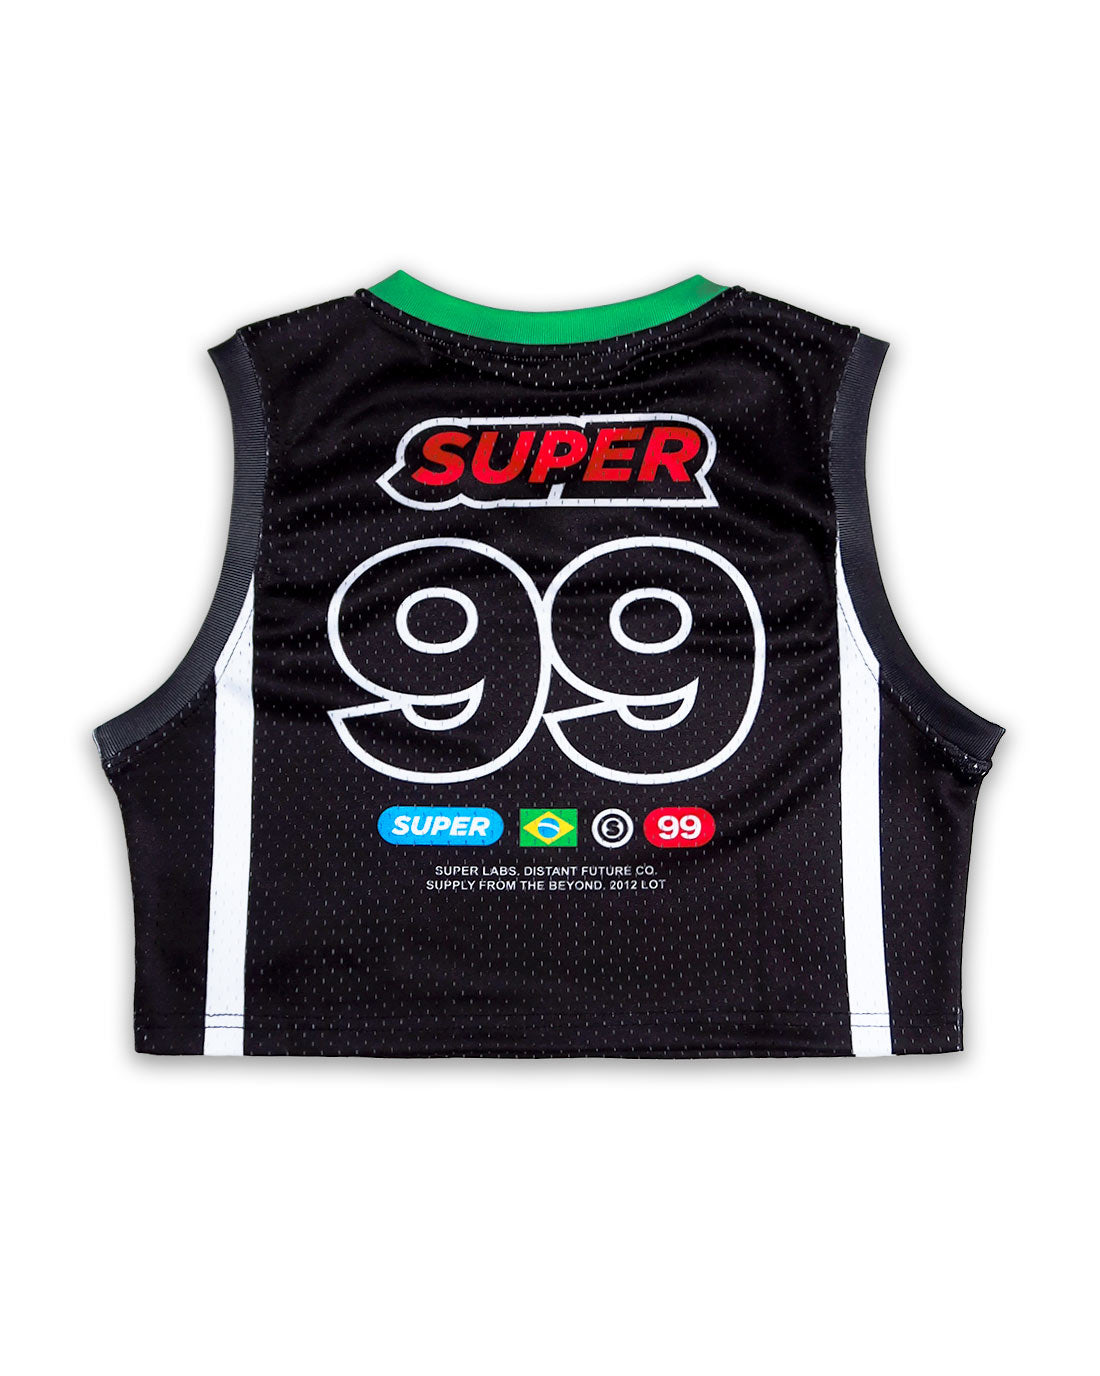 Rear view of a women's sleeveless basketball jersey crop top in black with green neck trim, featuring lightweight mesh fabric and number 99 printed on the back.